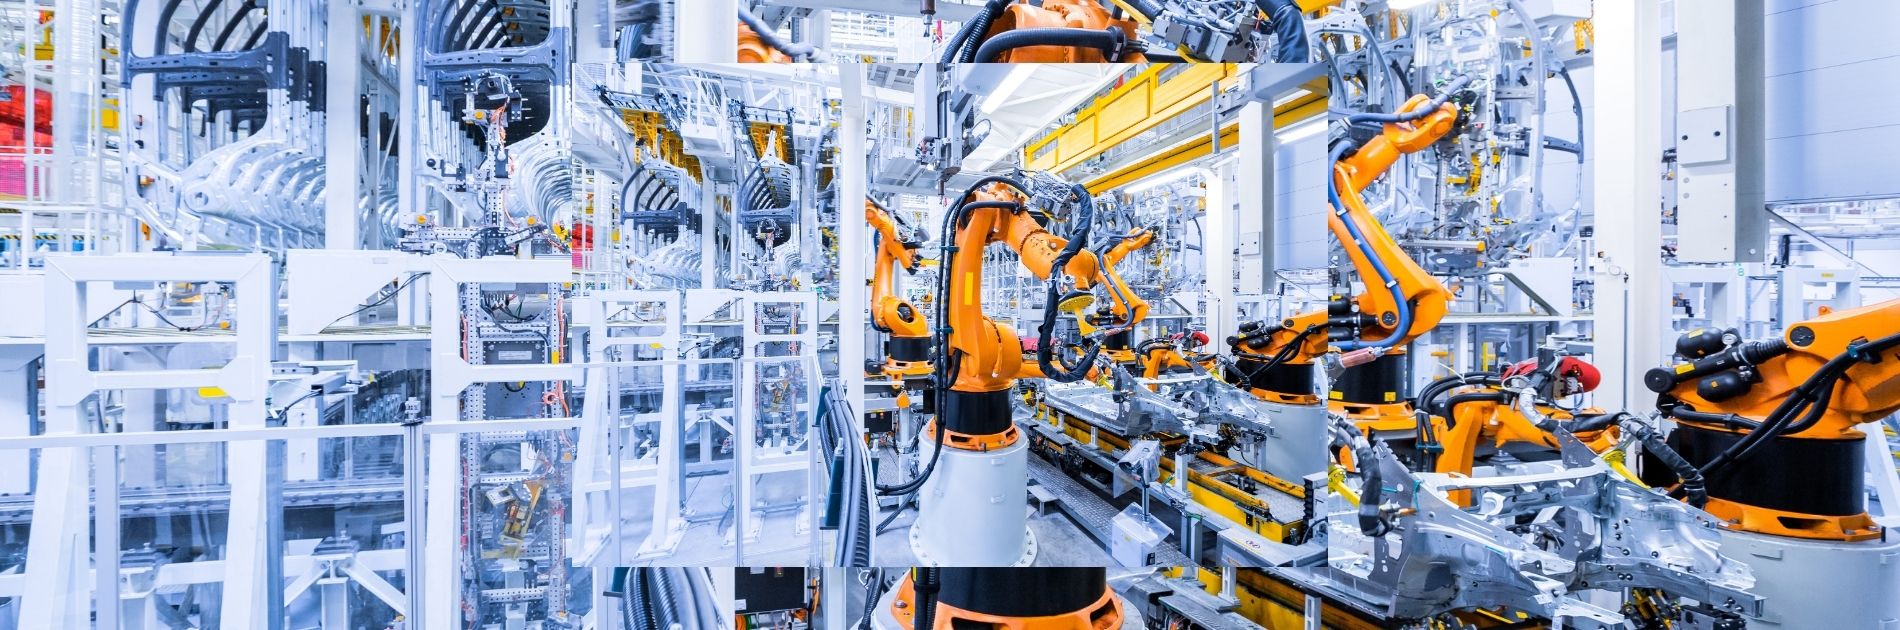 Machines performing human tasks in the factory of the future